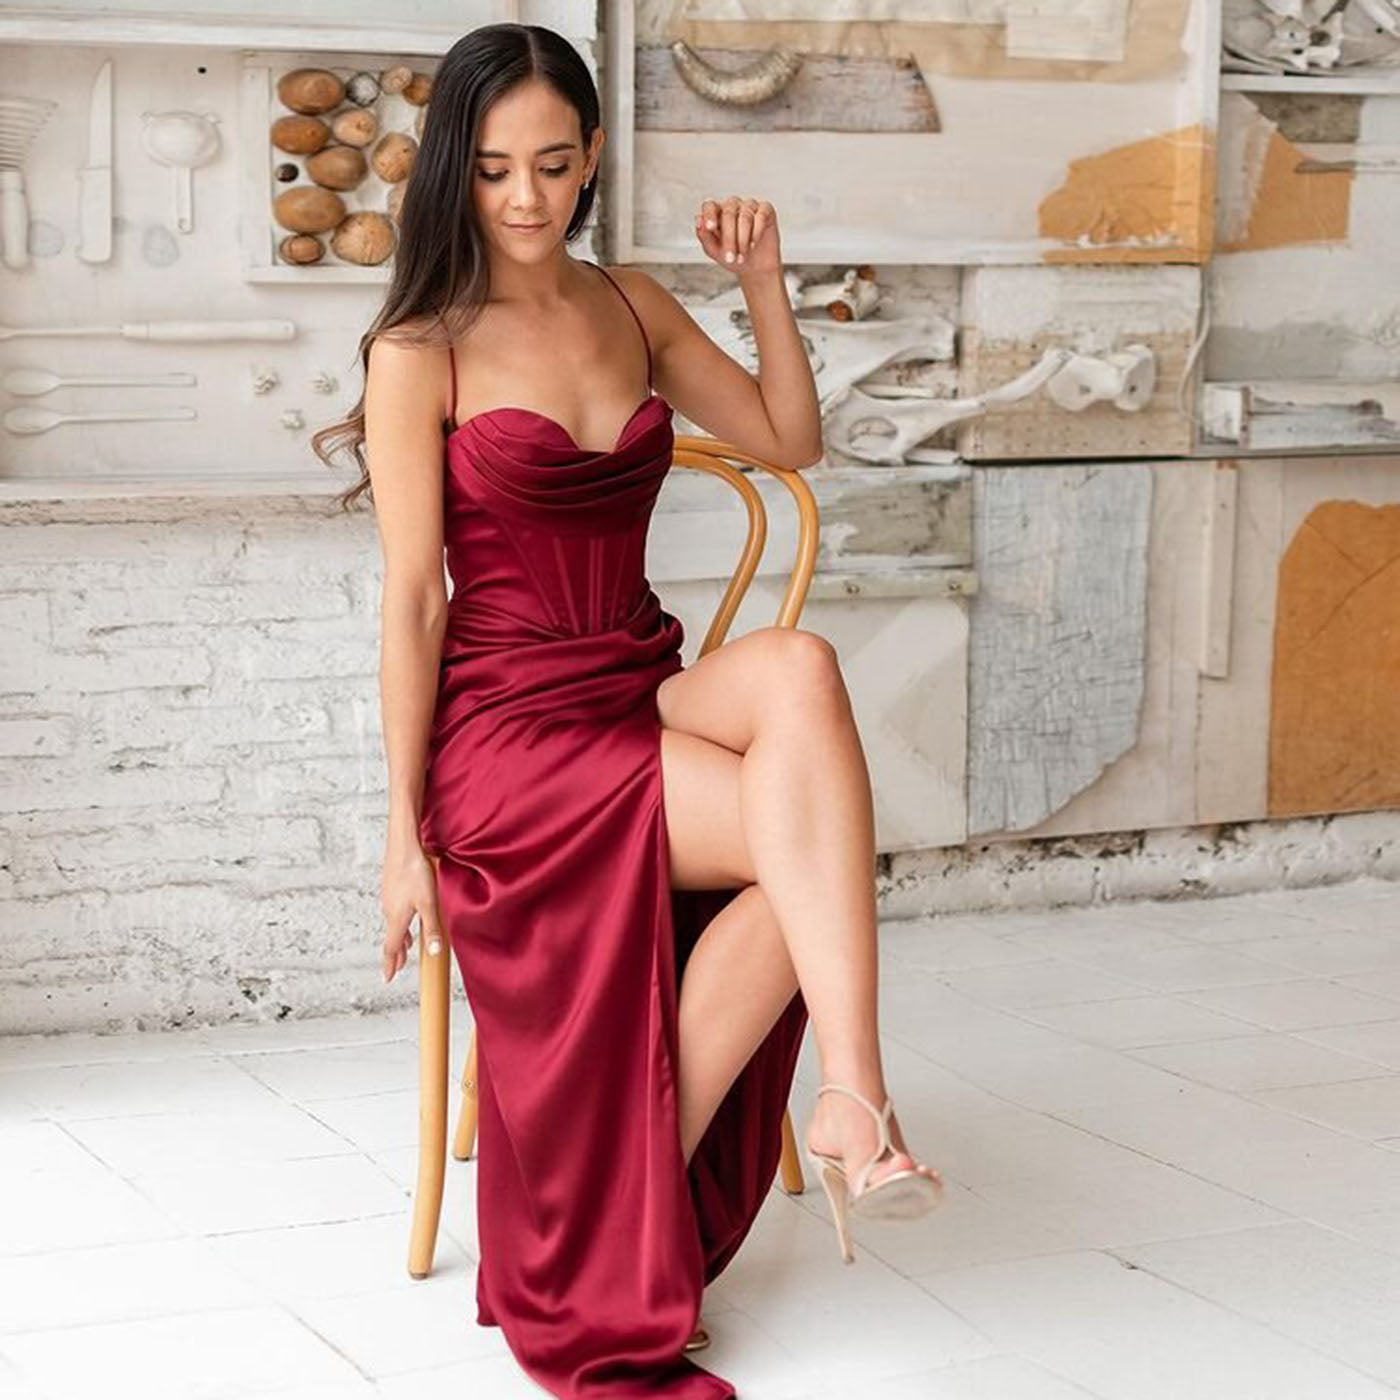 New Summer Prom Dress Women'S Sling Sleeveless Solid Color Dress One Word Neck Slim Fit Open Back Slit Red Sexy Dress ClaretLChina  110.99 EZYSELLA SHOP